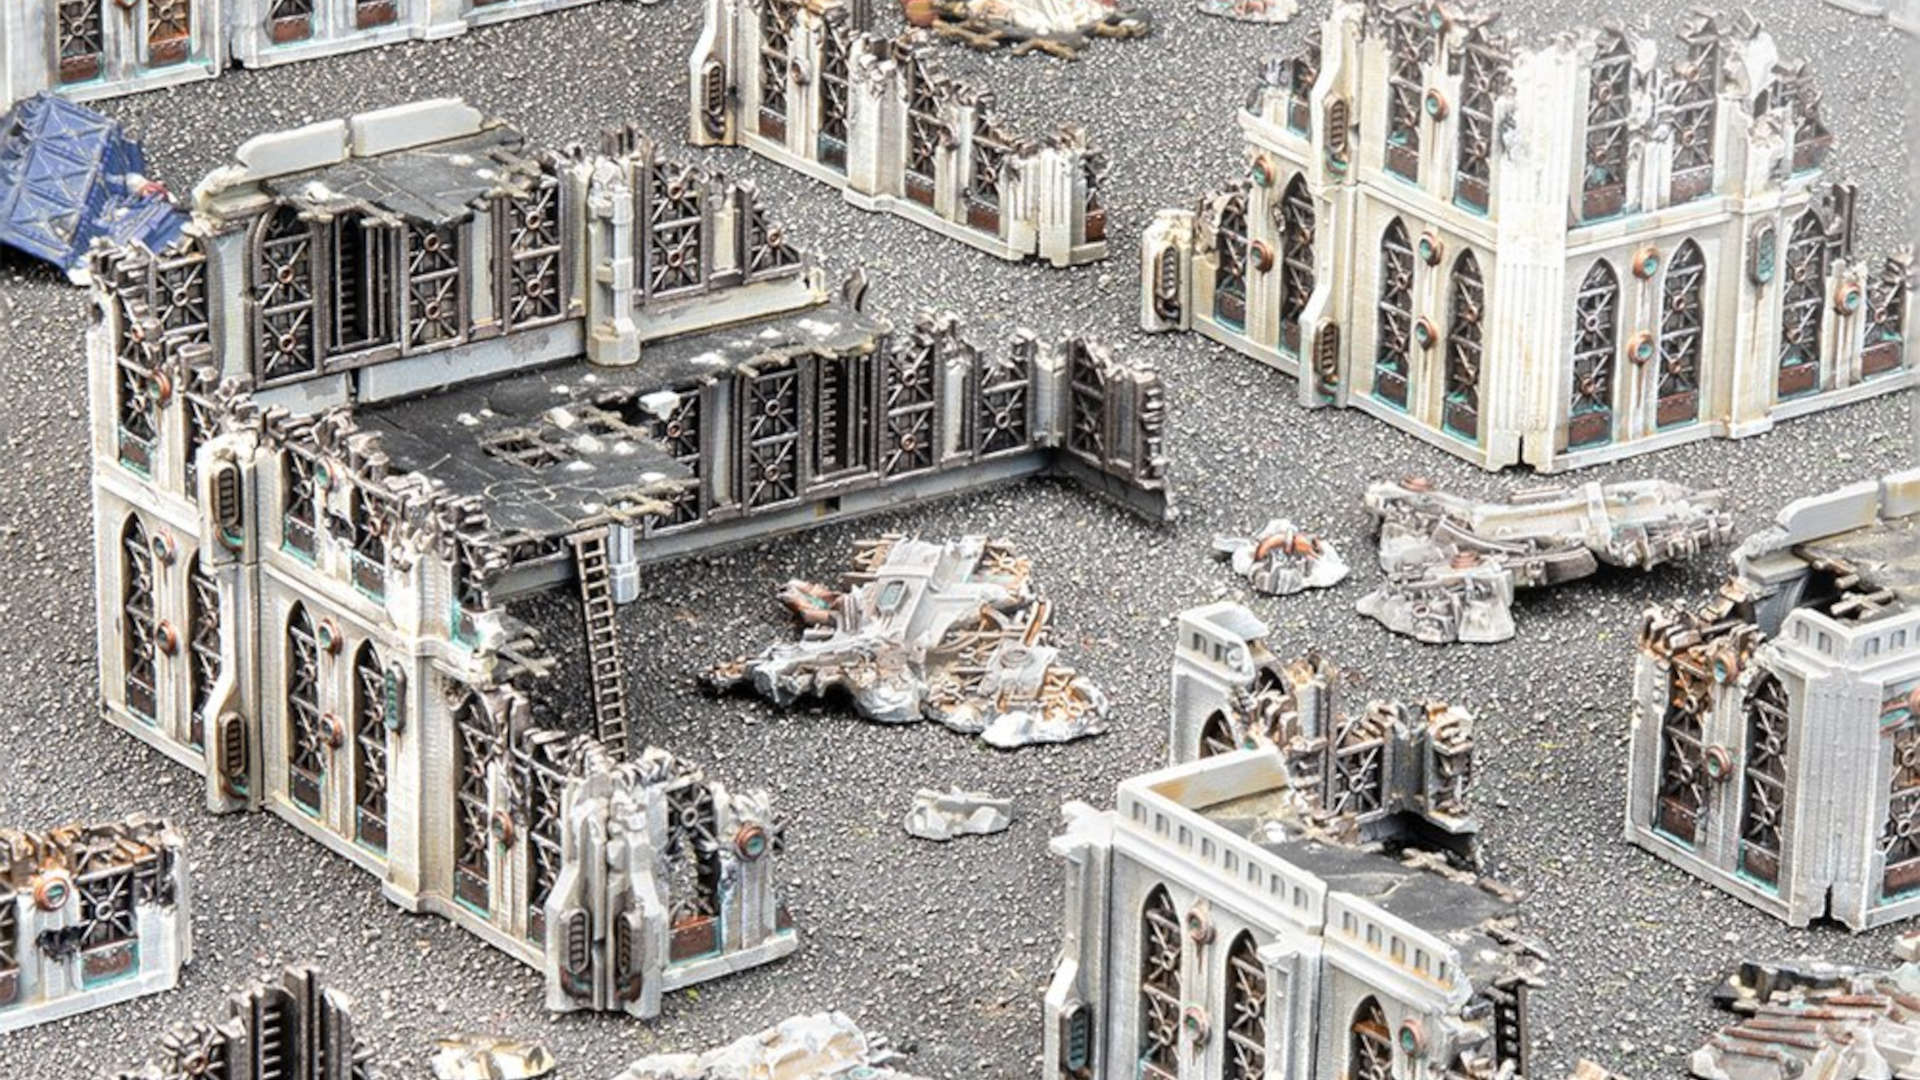 Sector Imperialis Terrain Build - Rapid Fire Wargaming